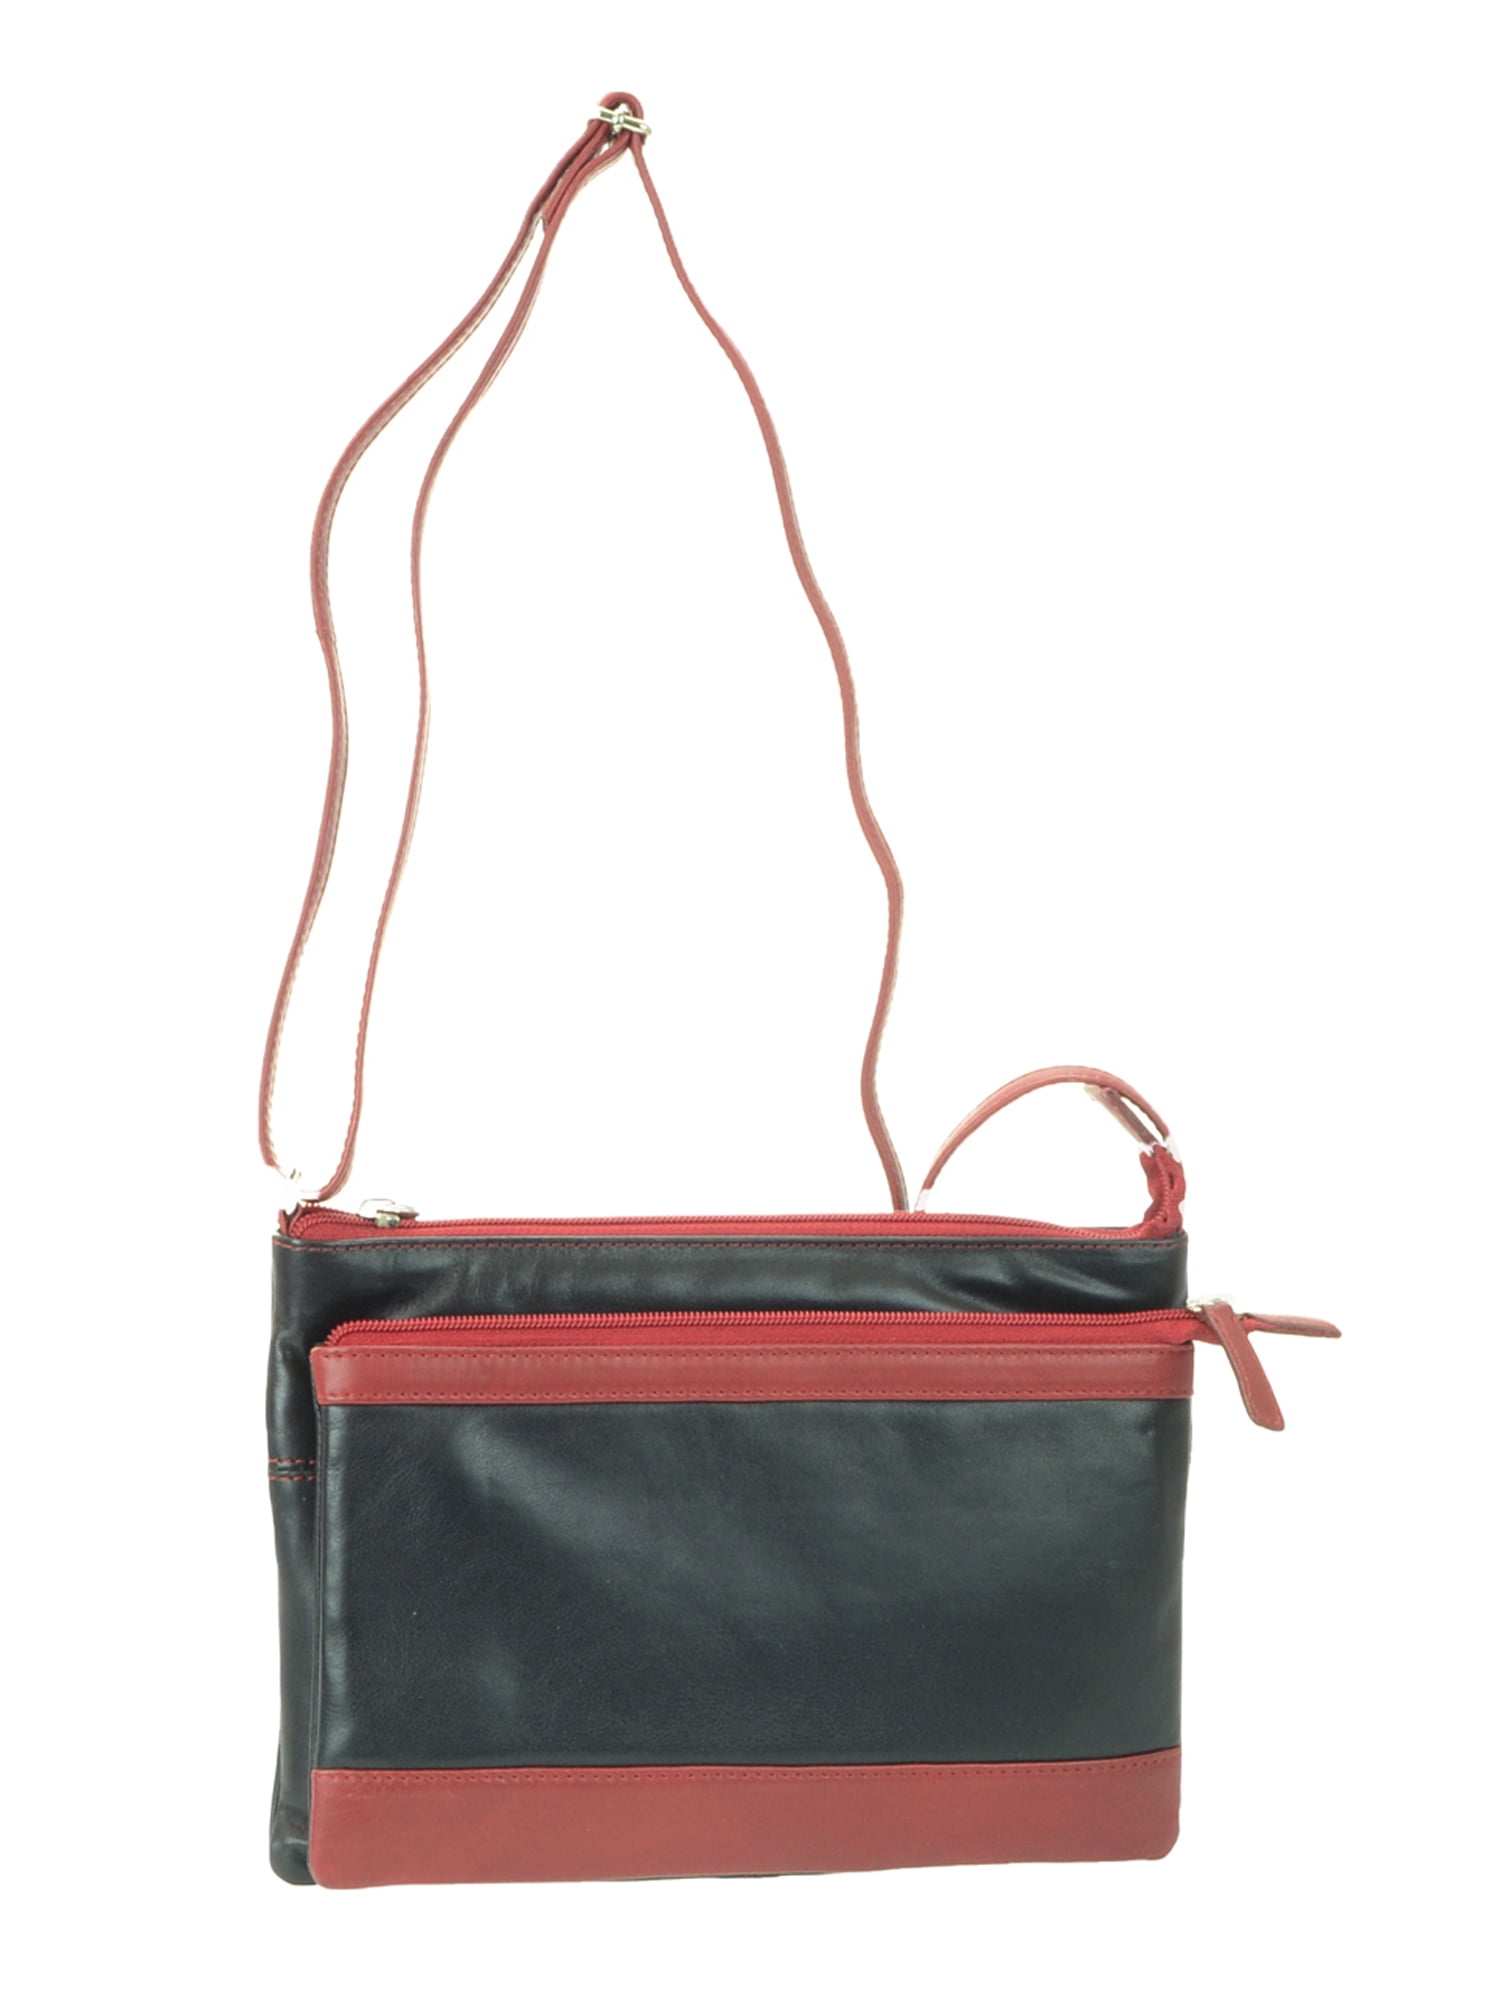 Details about   Le Donne Leather Mallory Crossbody 4 Colors Colombian Leather Cross-Body Bag NEW 